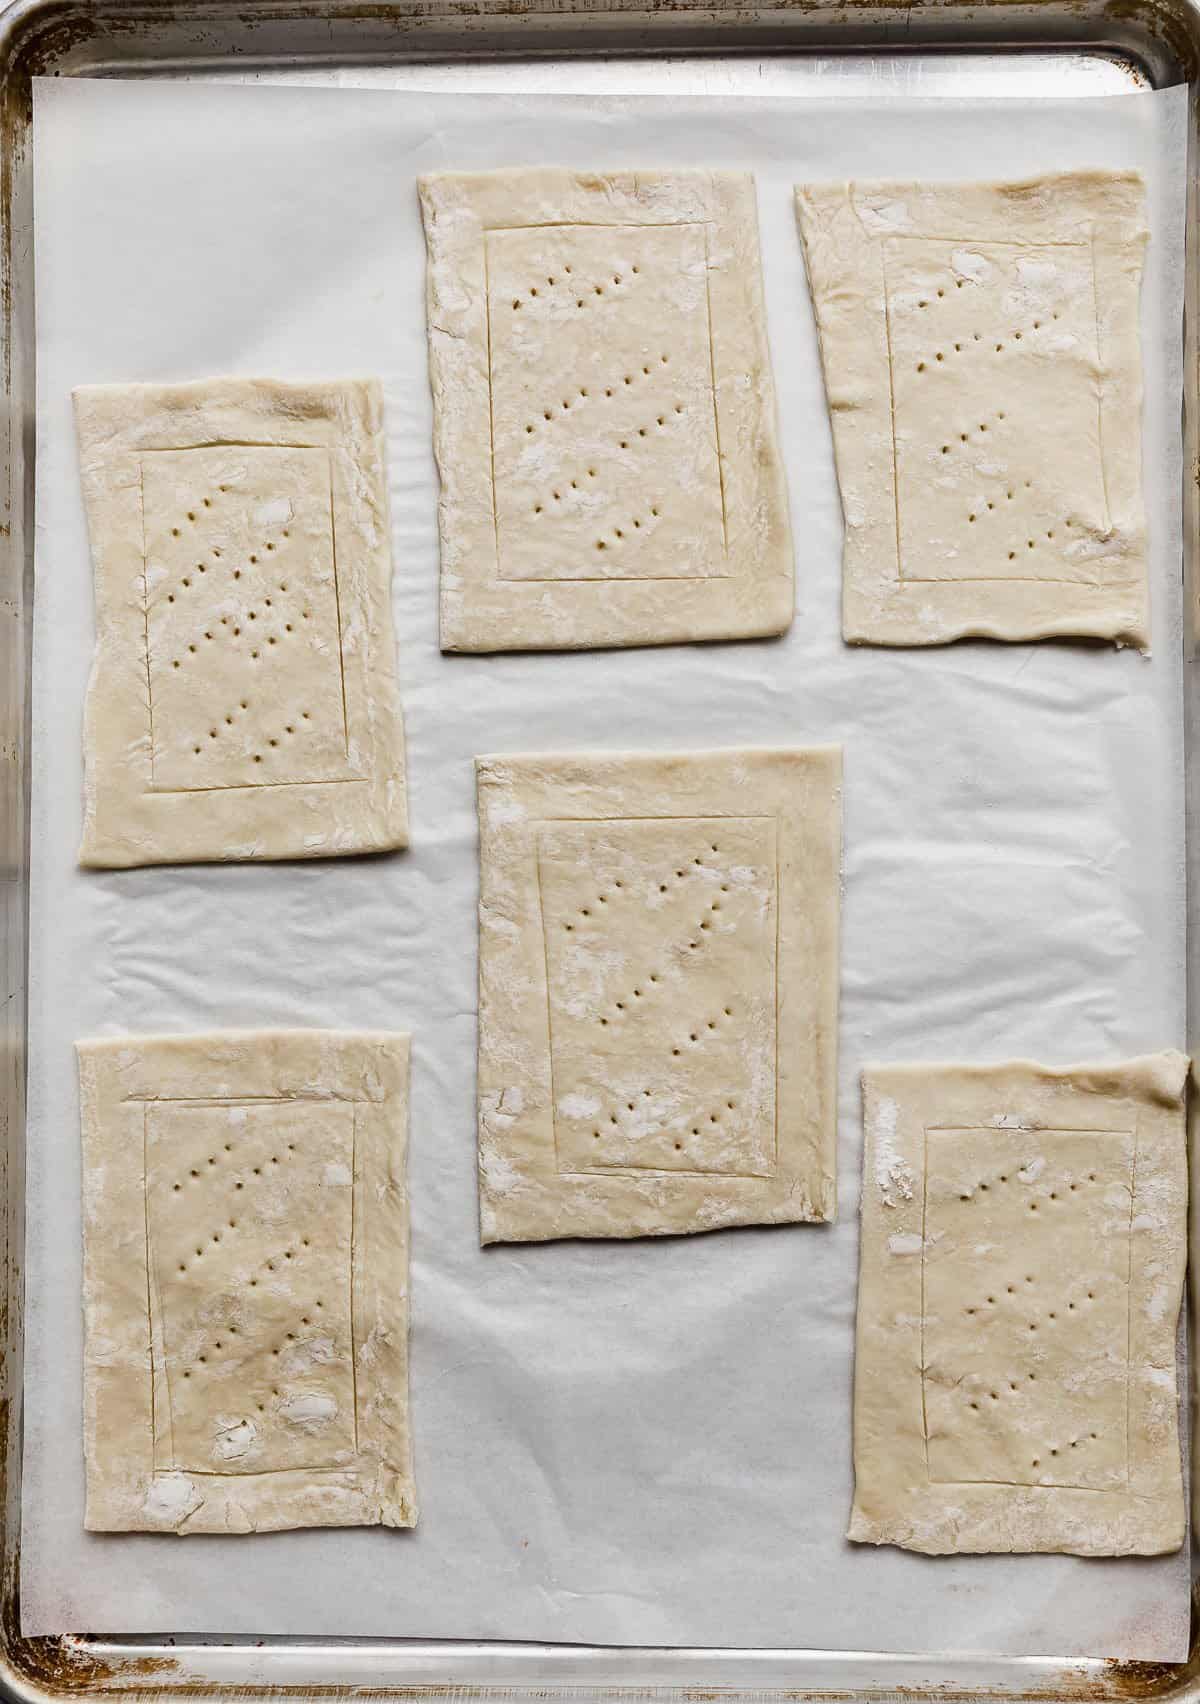 Six puff pastry rectangles with fork tine holes in the center of each.